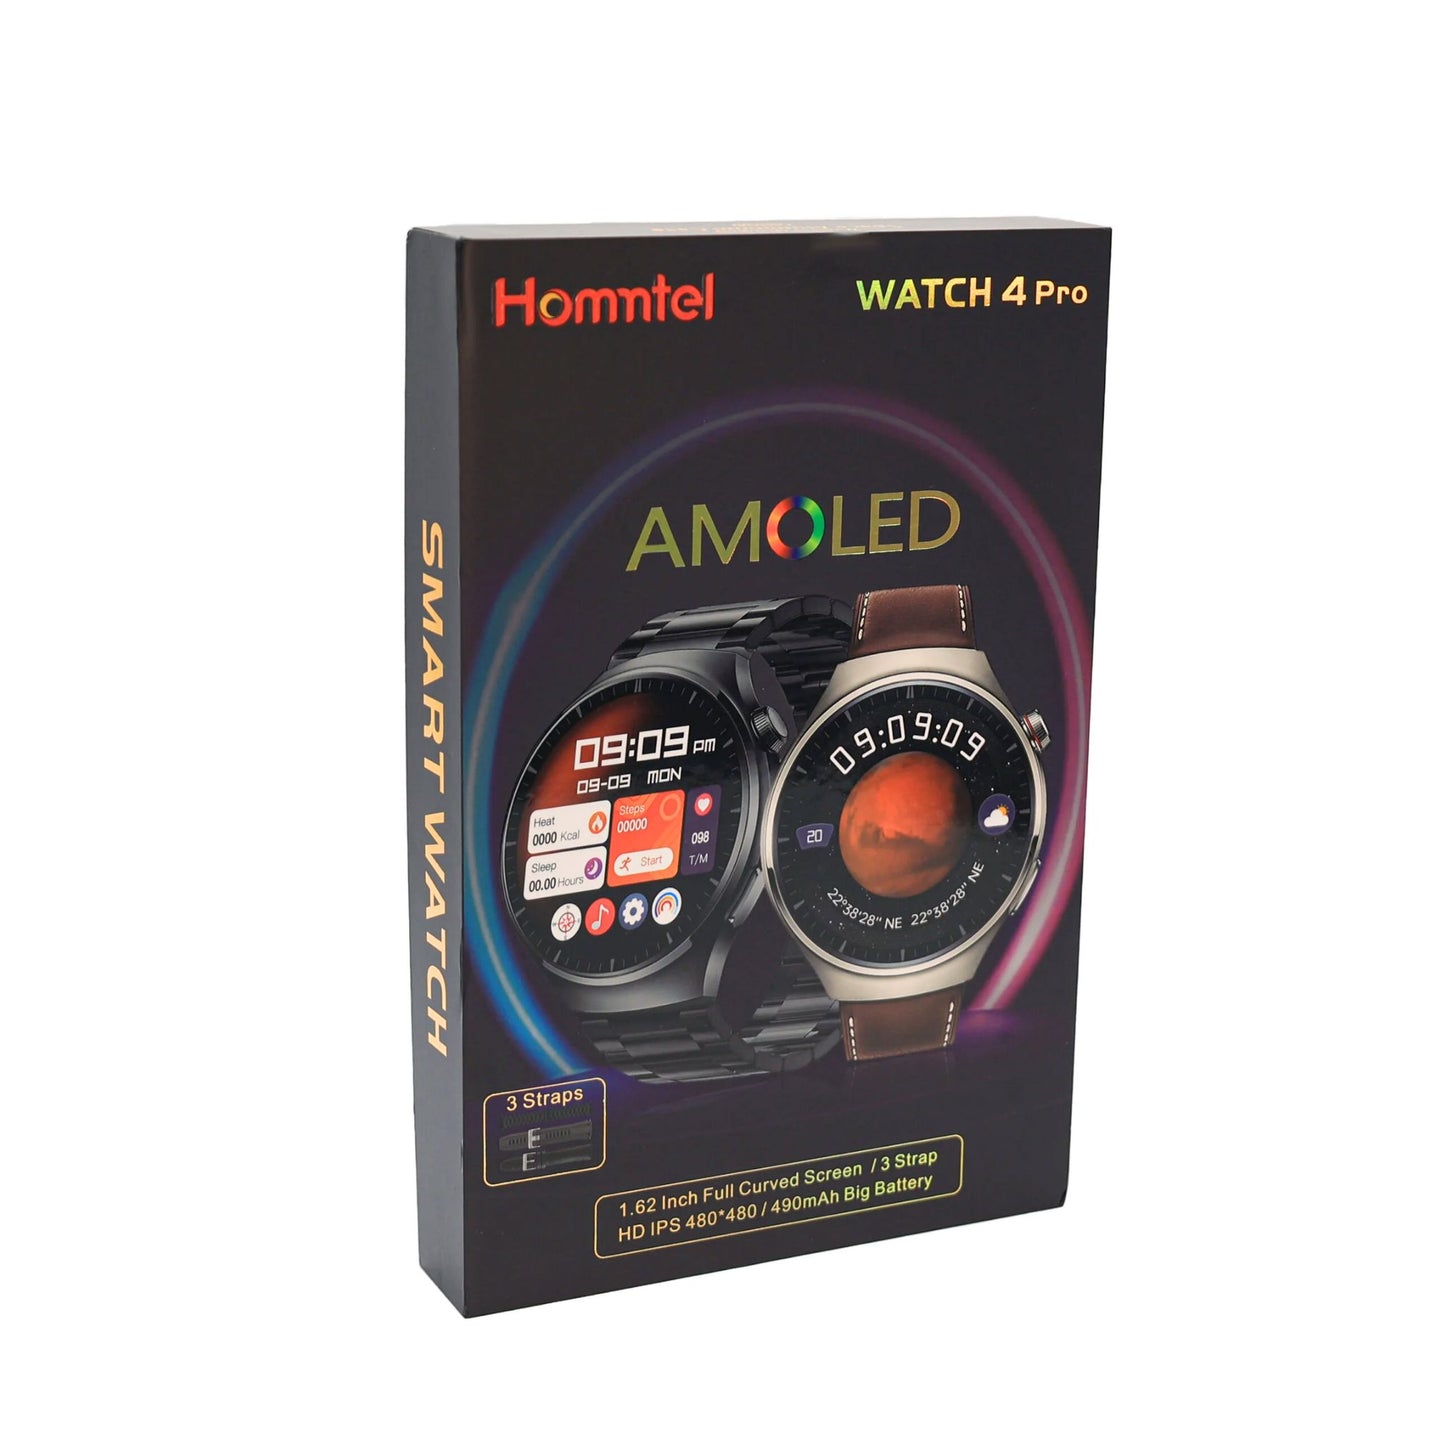 Homntel Germany Watch 4 Pro with 3 Straps HD IPS Amolded Display 480*480/490mAh Big Battery_Black